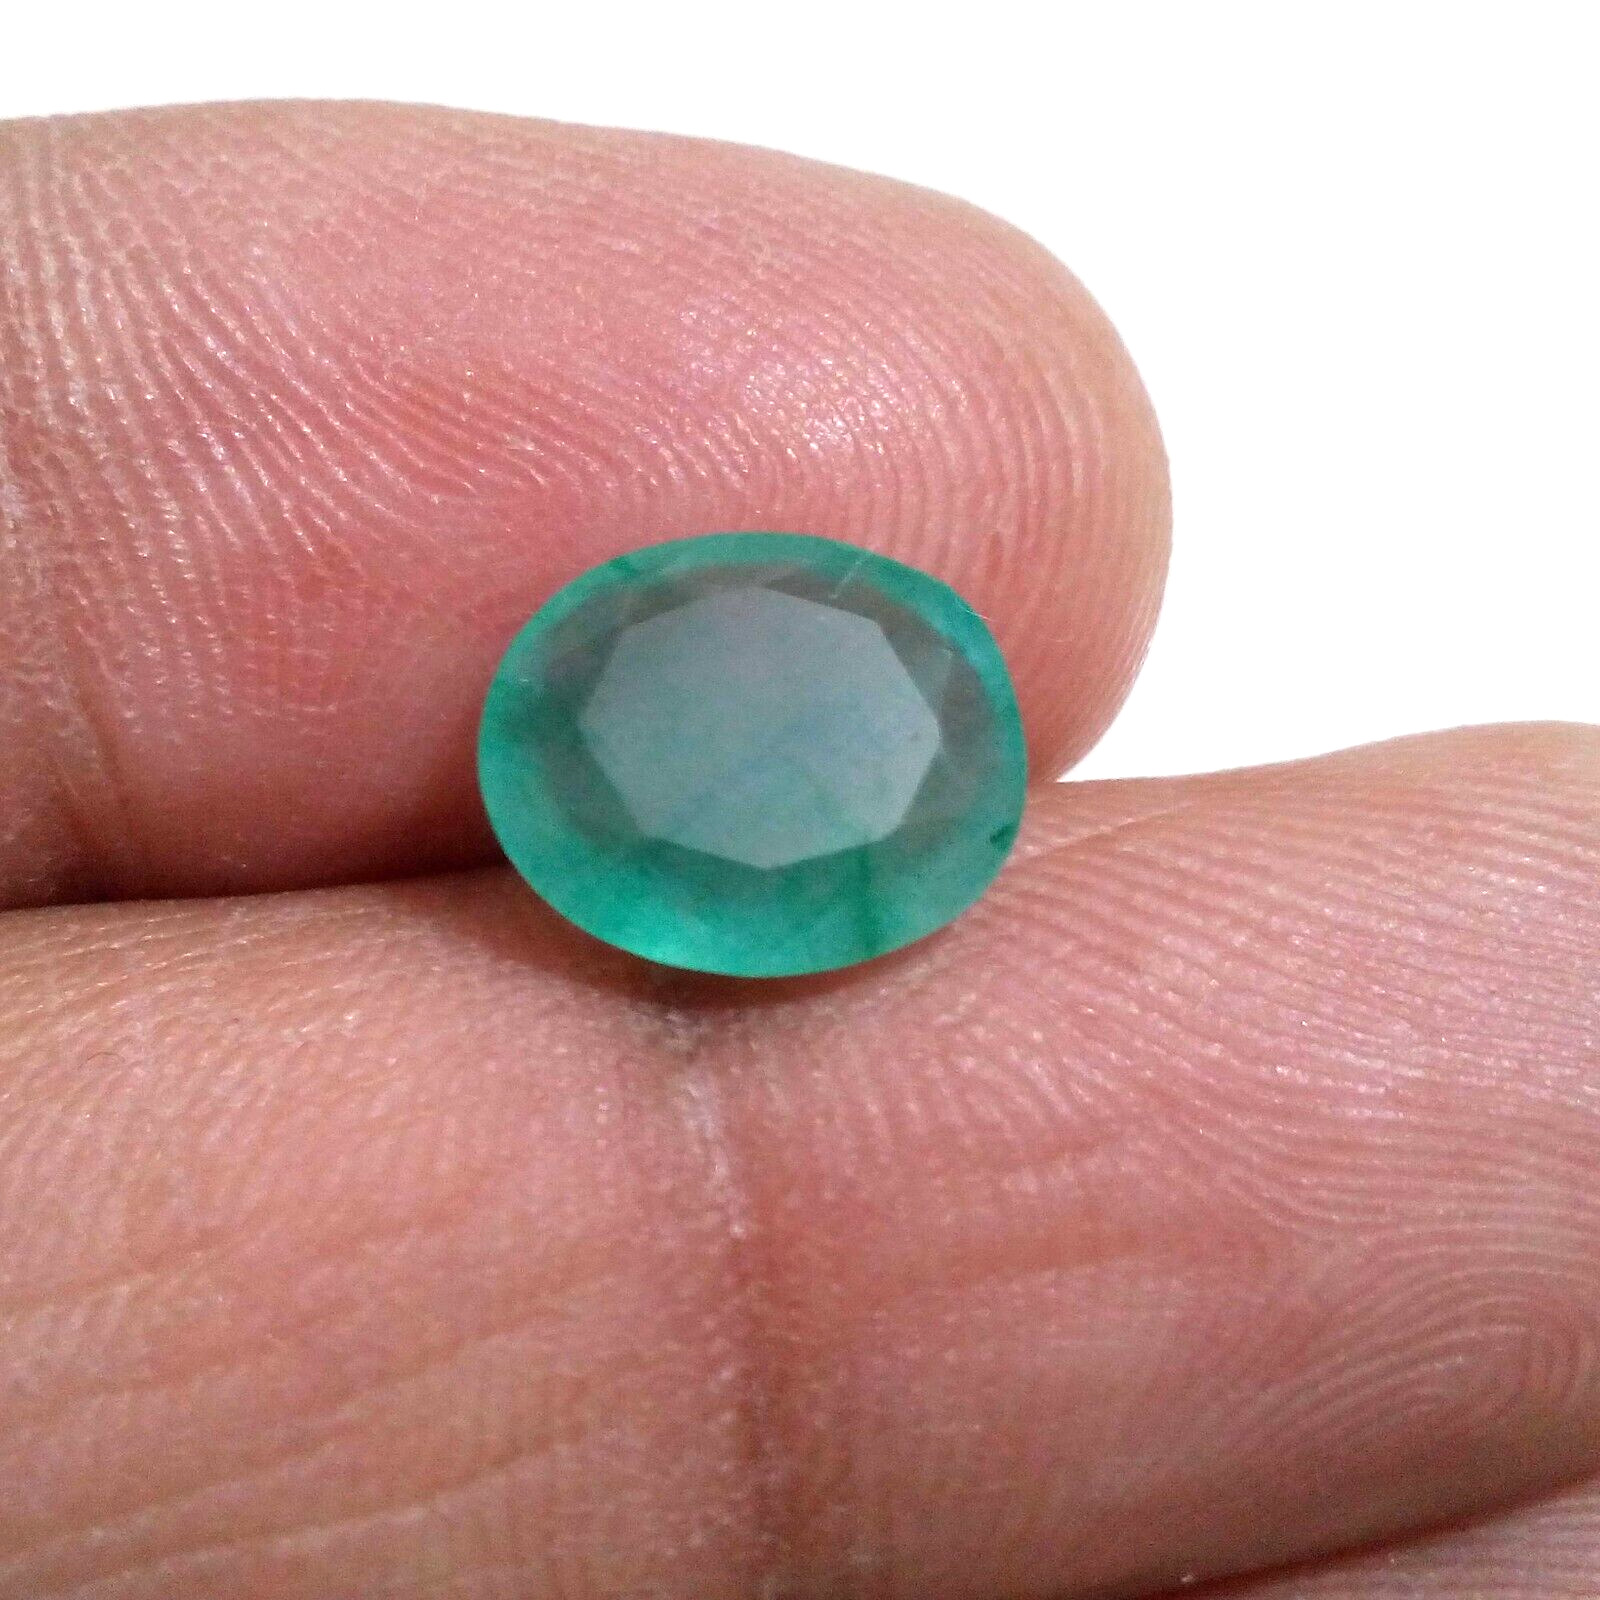 Attractive Zambian Emerald Faceted Oval Shape 3.55 Crt Emerald Loose Gemstone